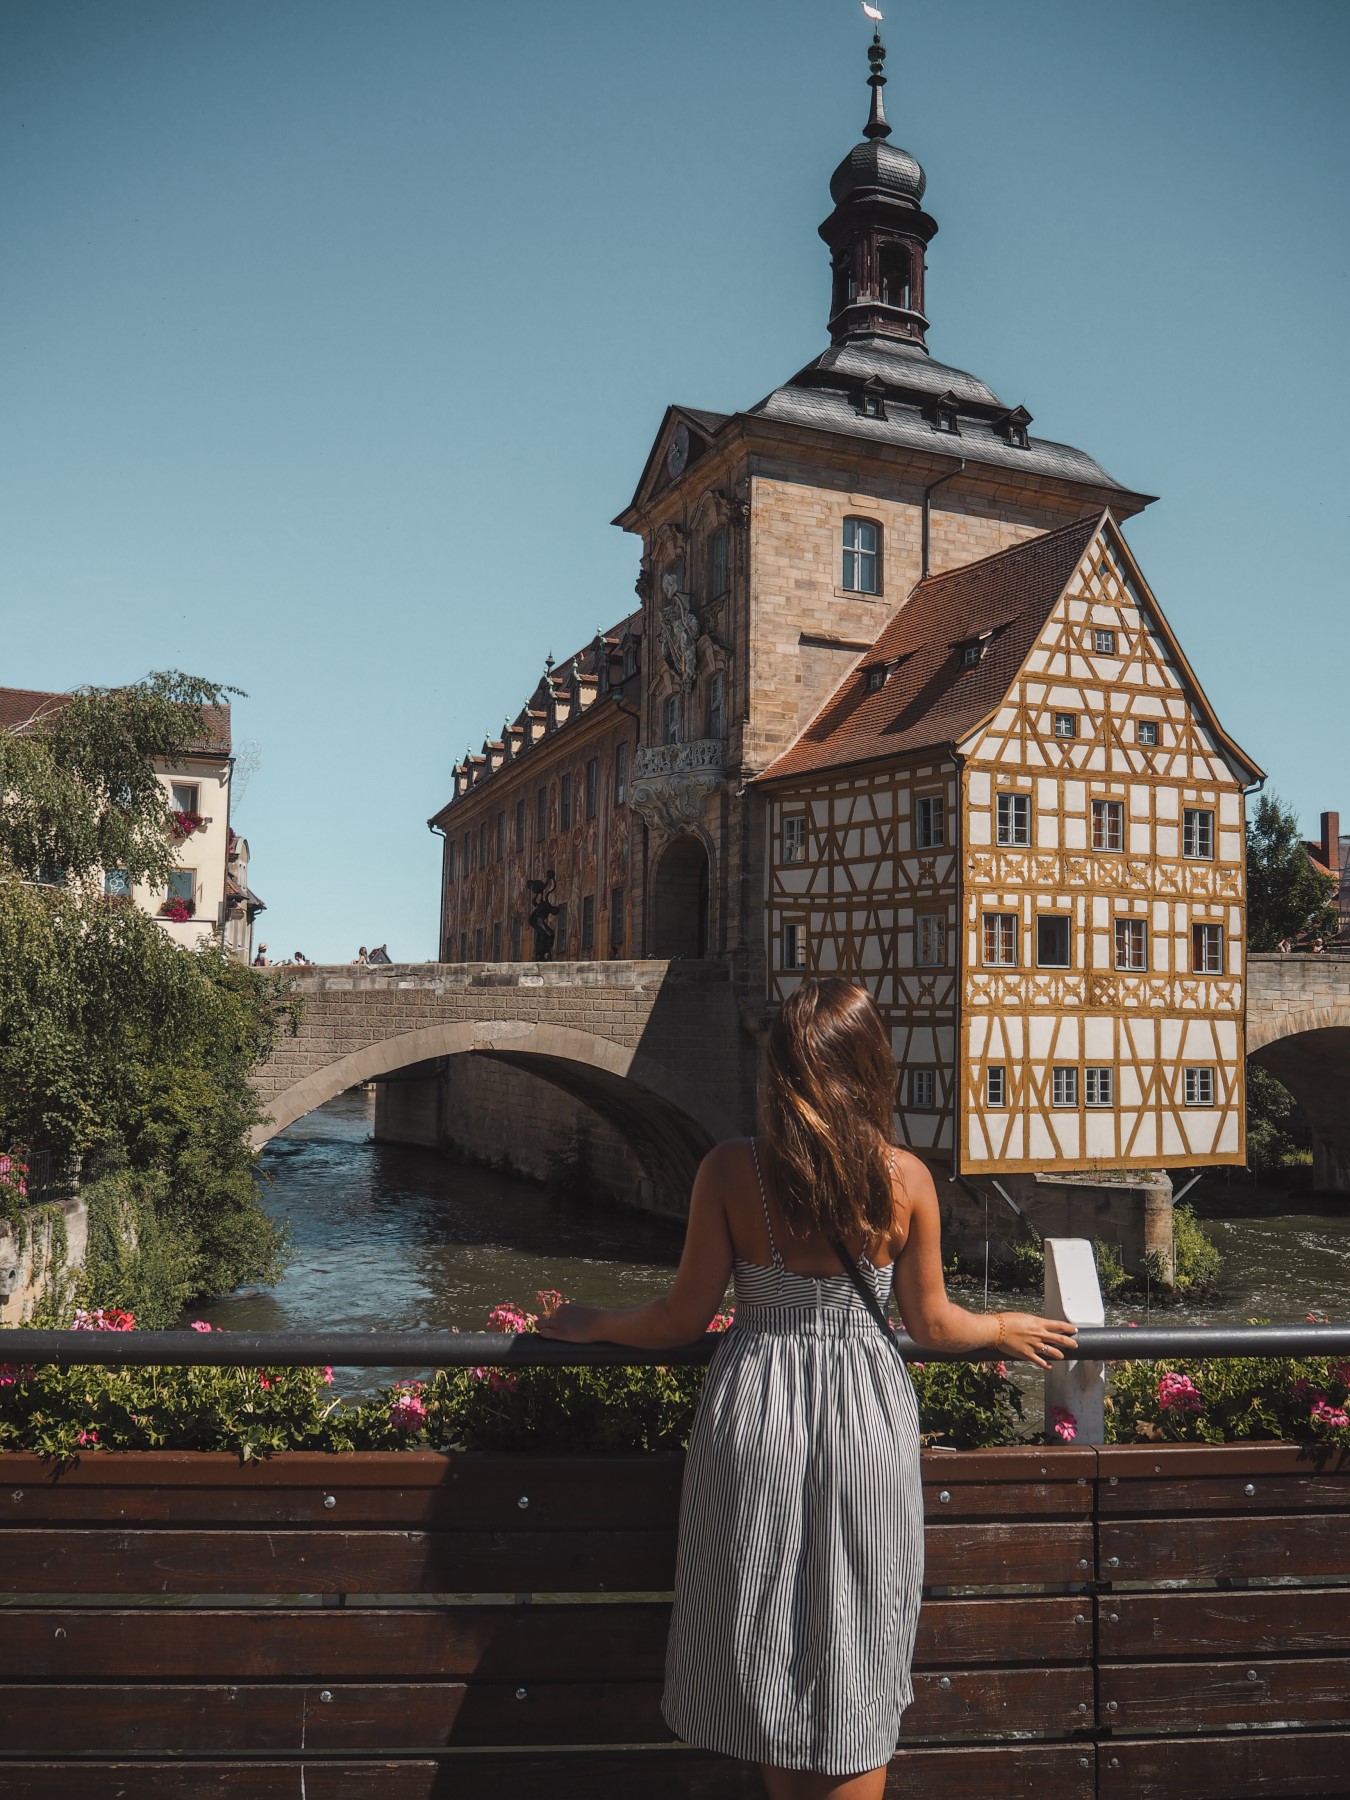 Bamberg Is Germany's Most Instagrammable Town | lifestyletraveler.co | IG: @lifestyletraveler.co